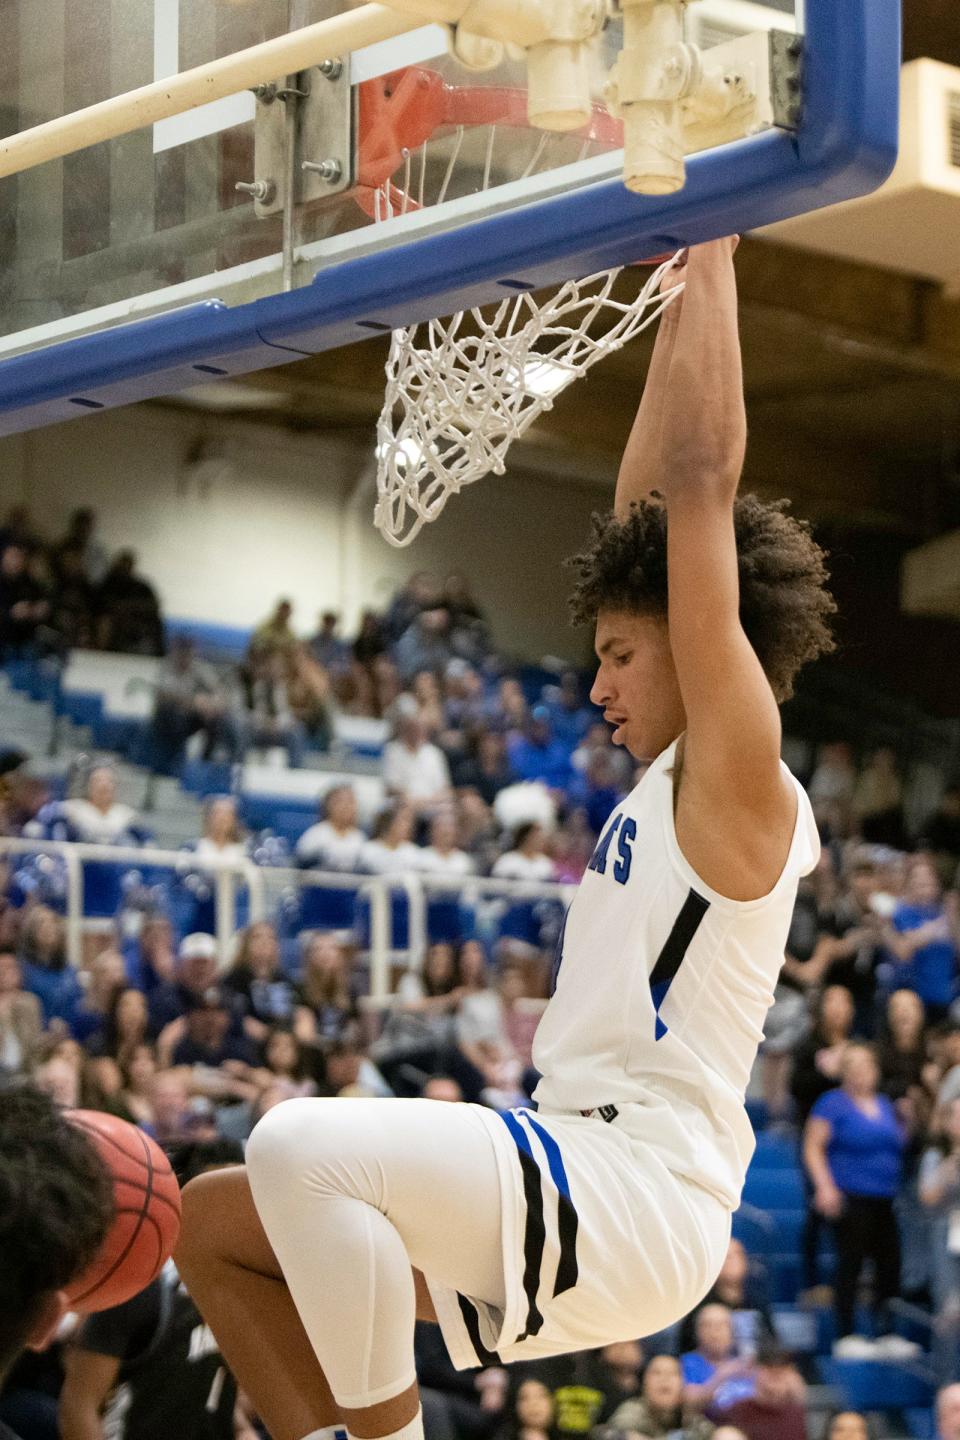 Pueblo Central's Kadyn Betts goes up high for a slam dunk during the third round of the Class 4A state tournament against Harrison at Jim Ranson Court on March 22.